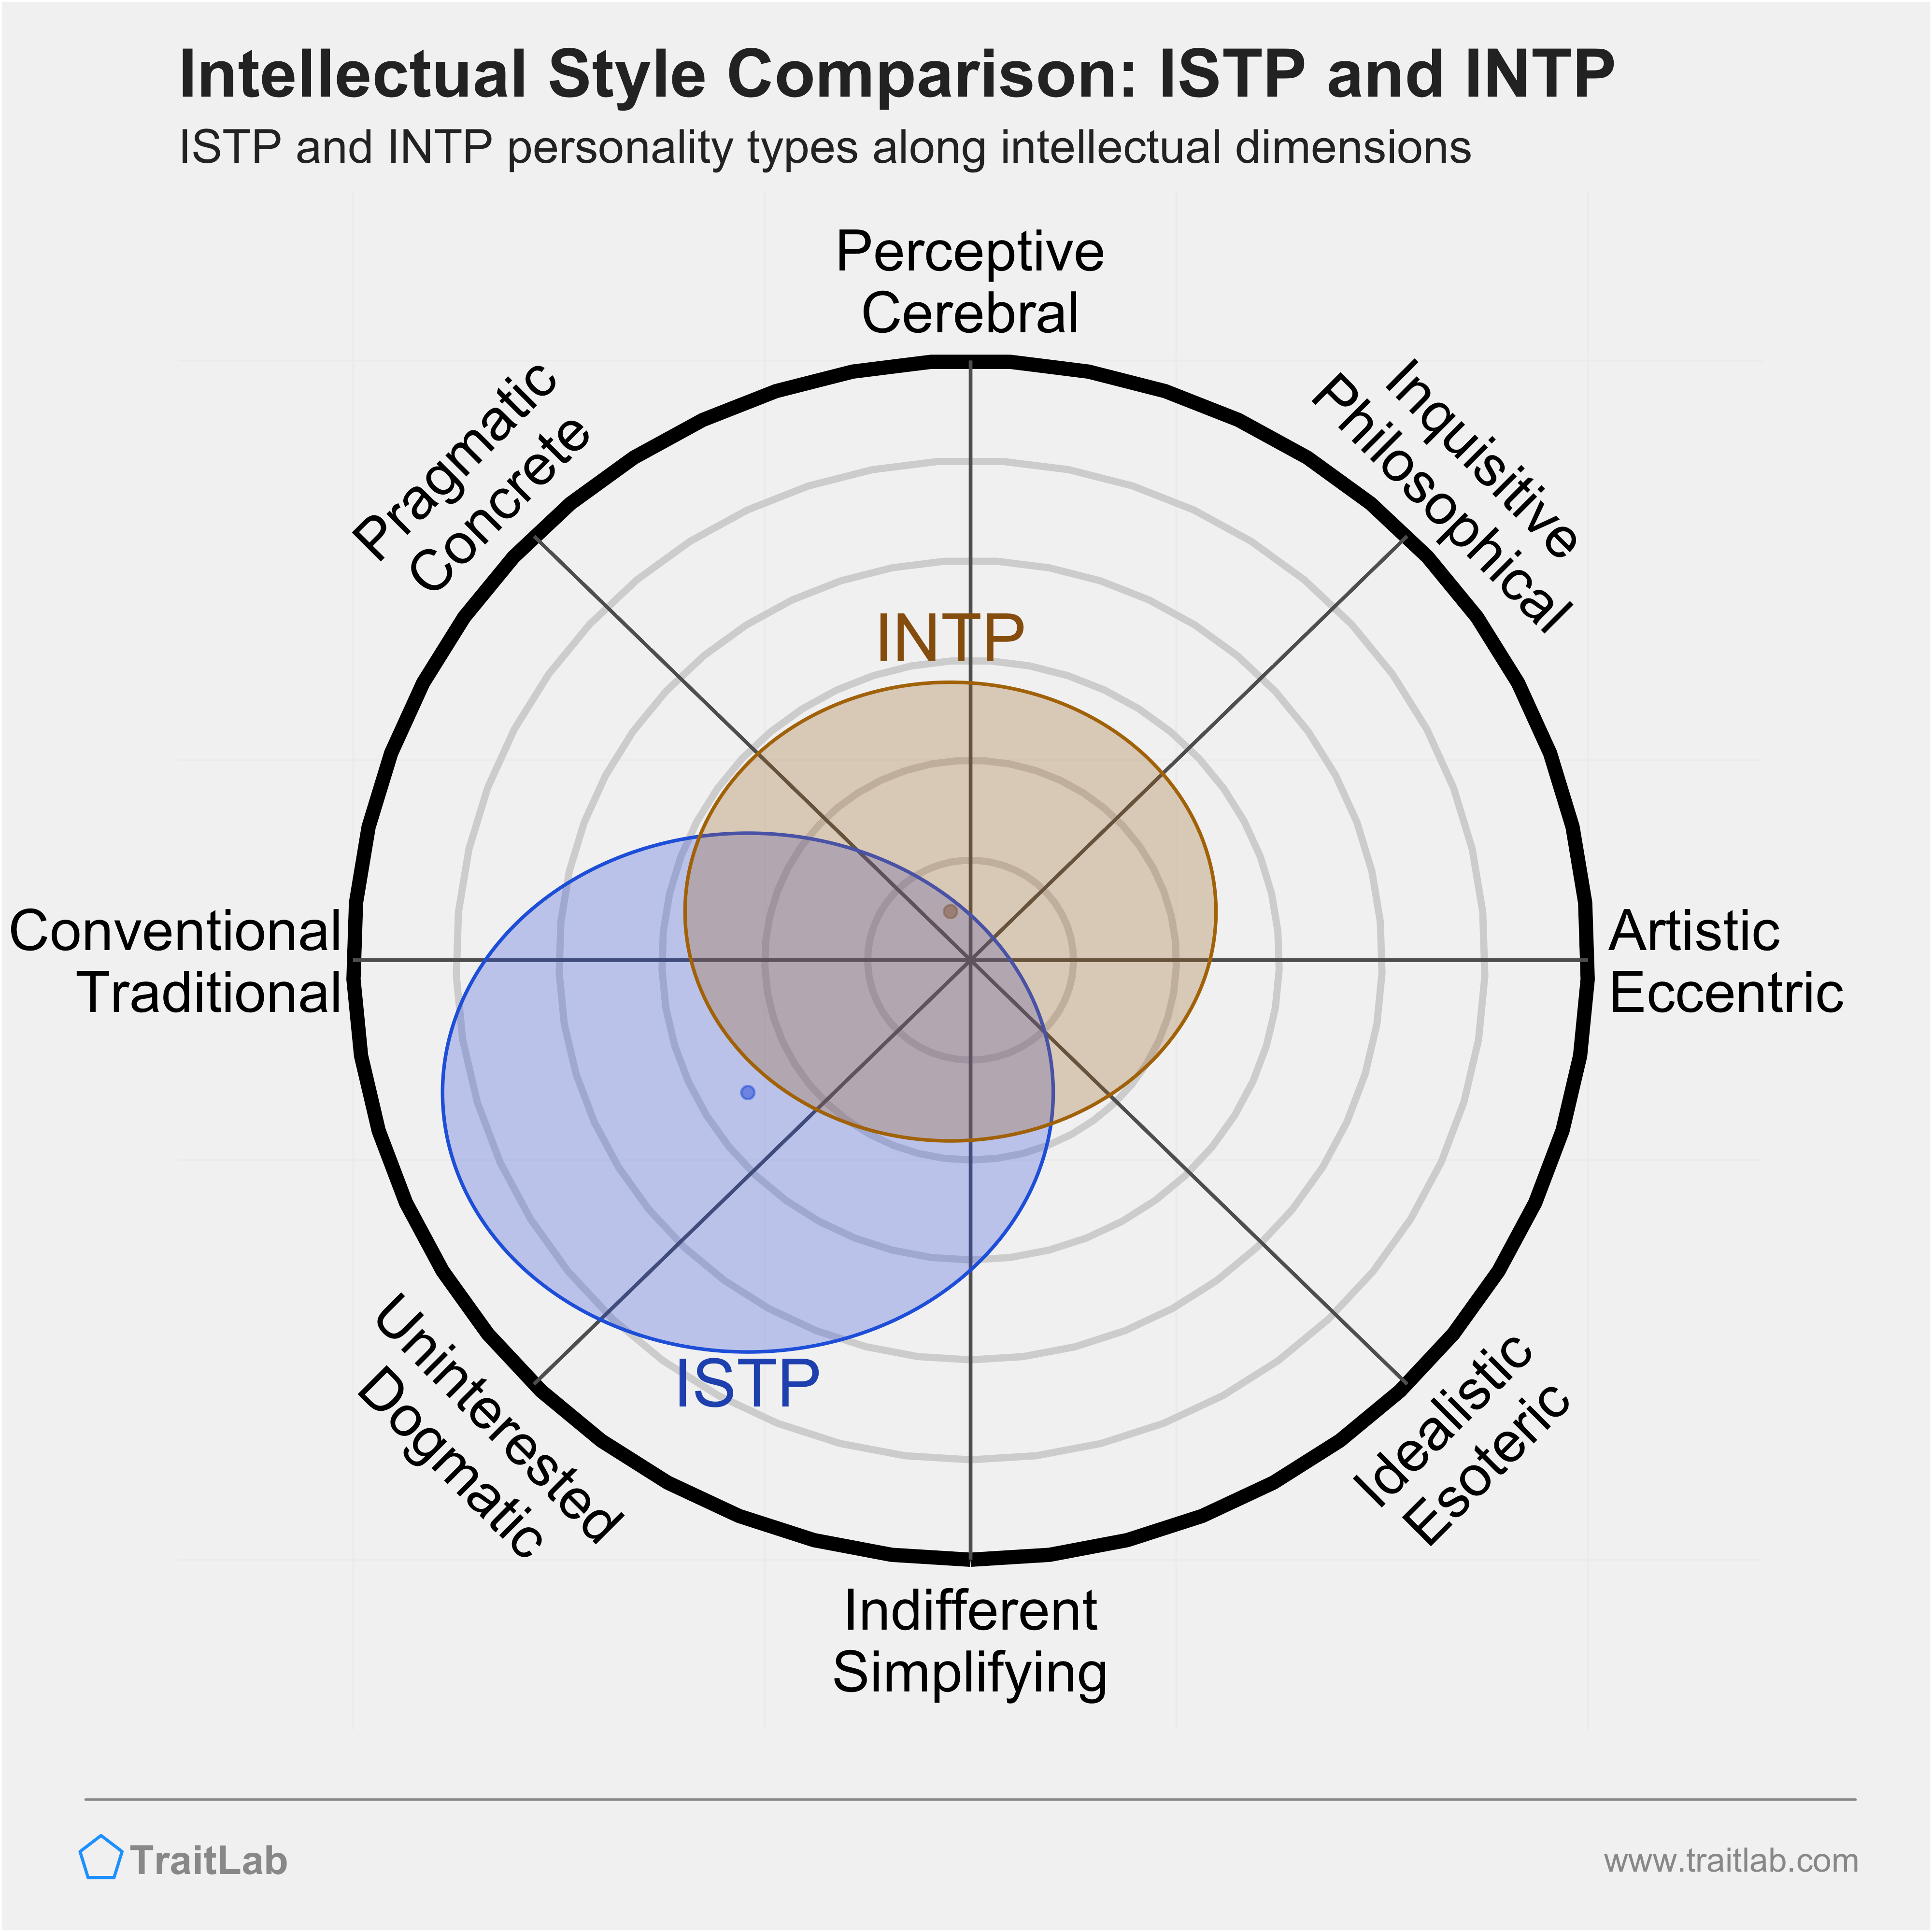 ISTP and INTP comparison across intellectual dimensions